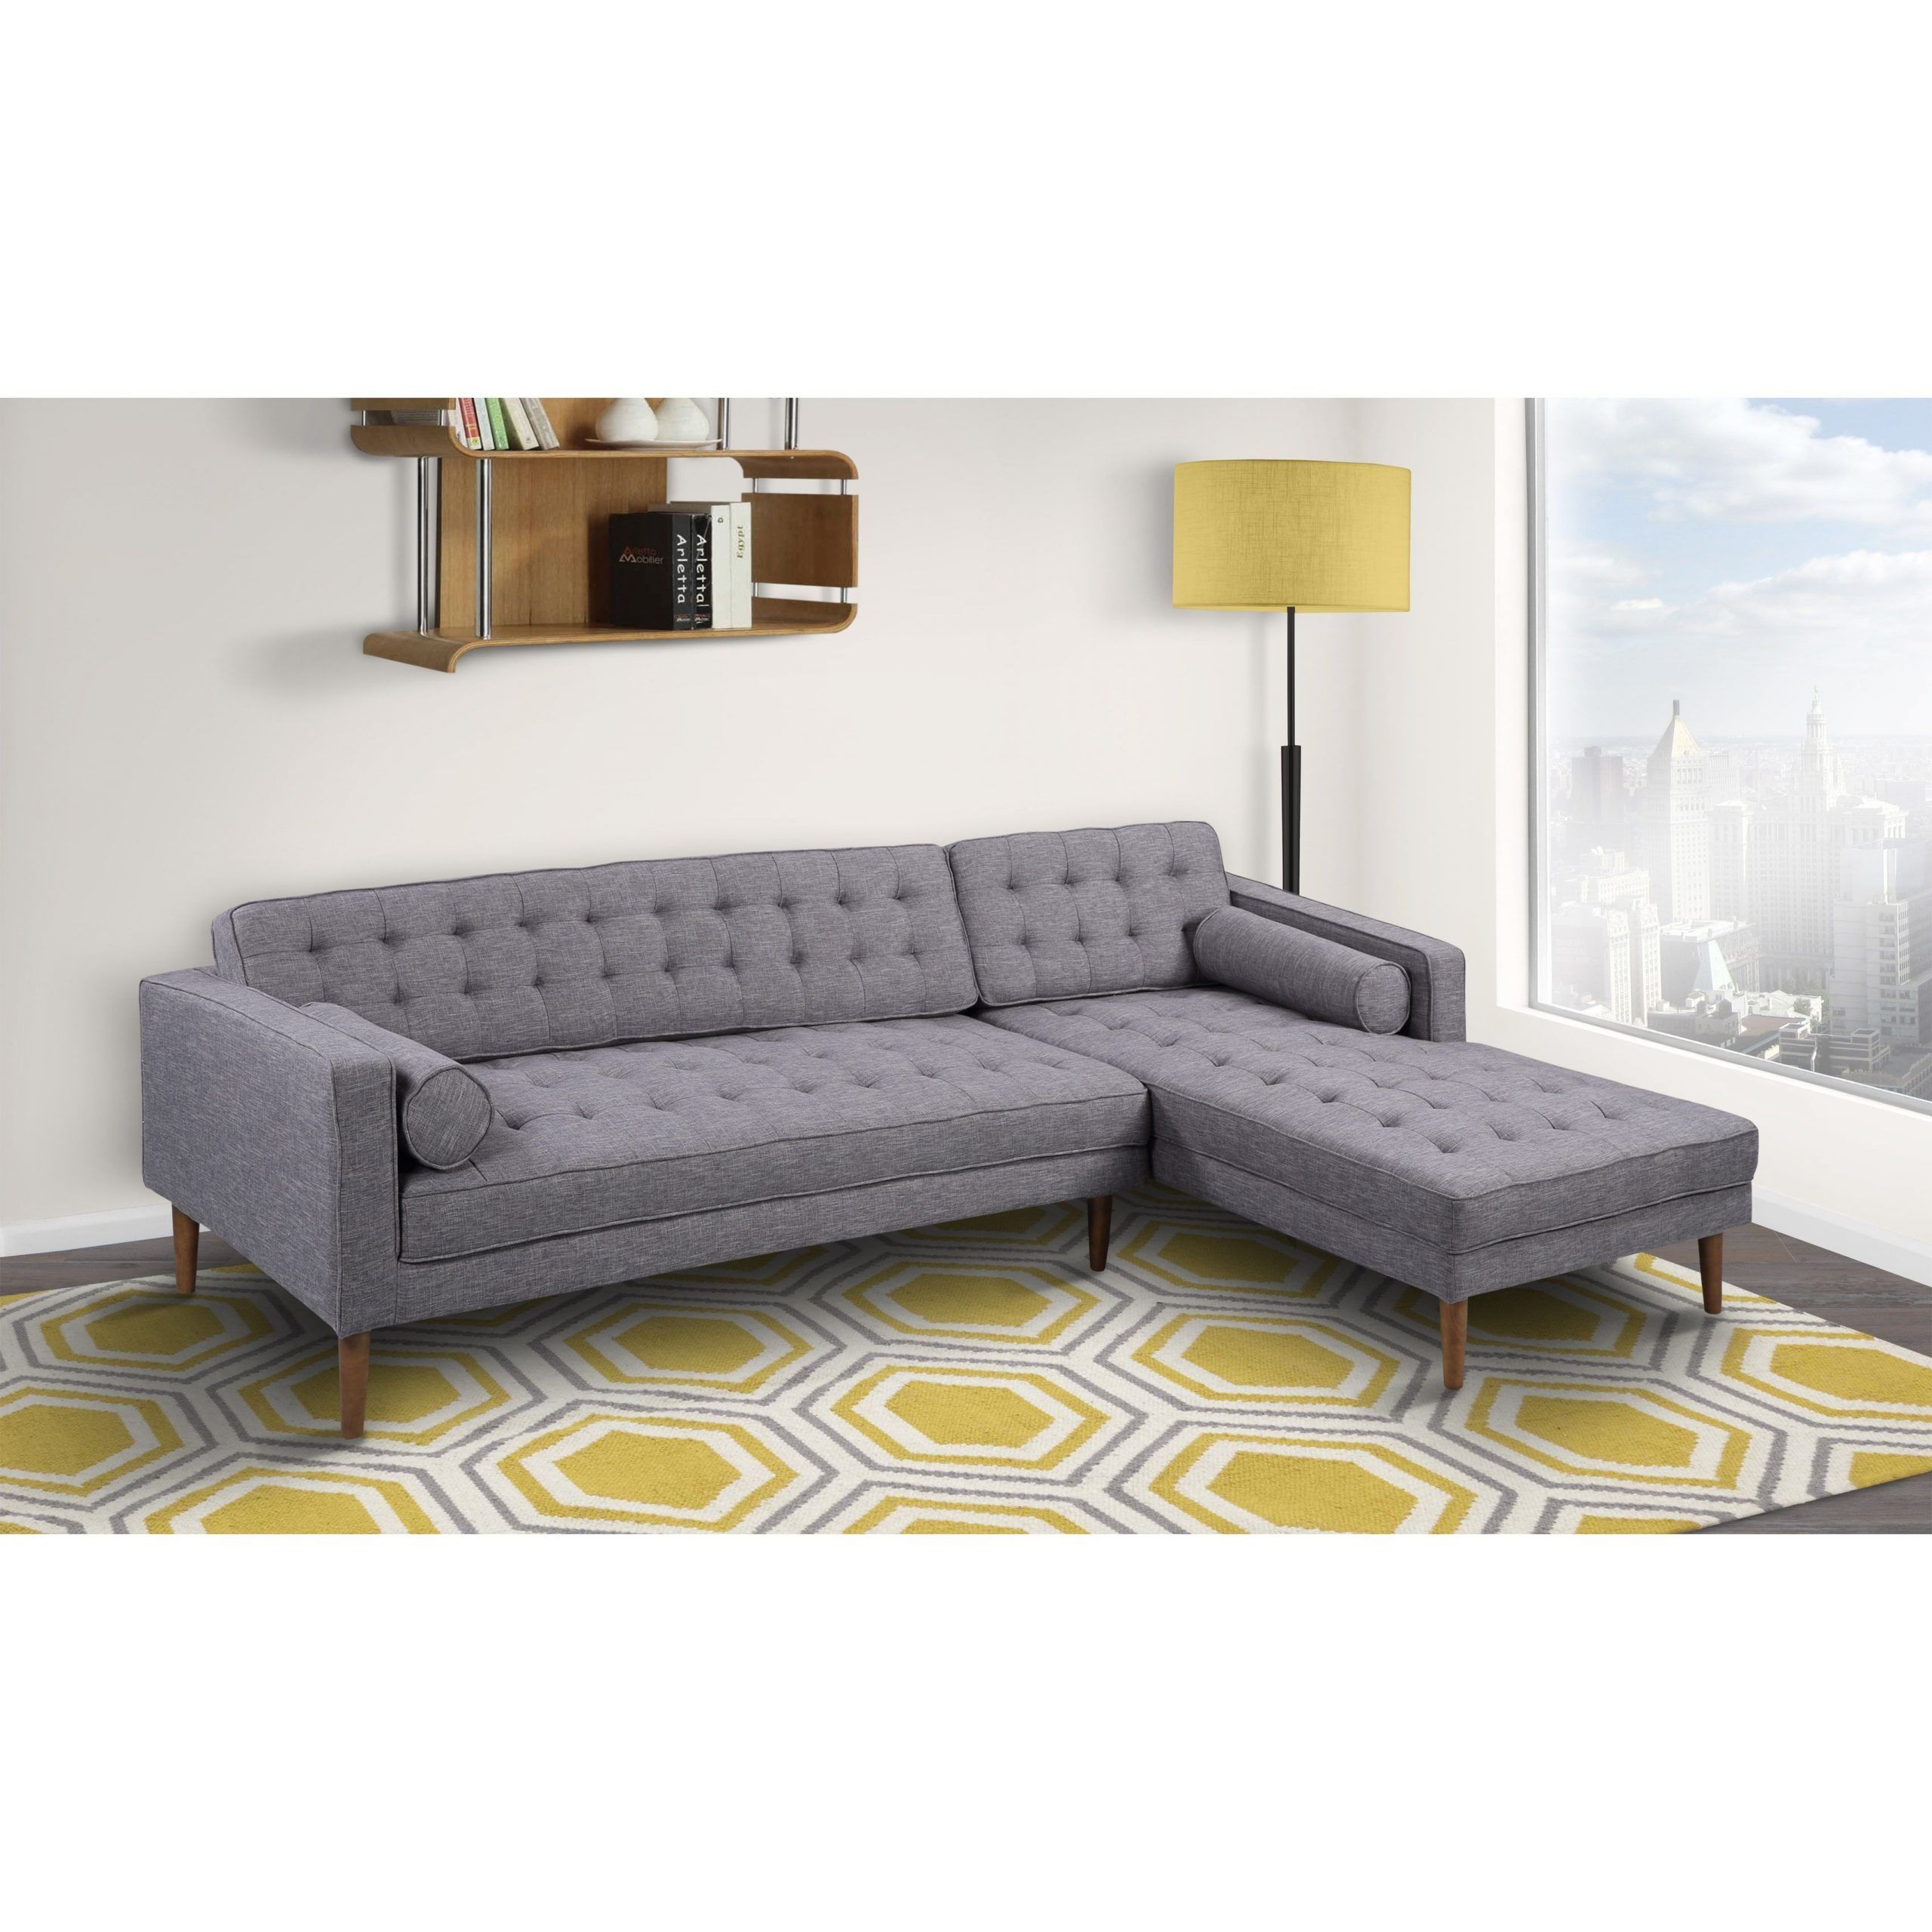 Armen Living Element Tufted Dark Grey Linen Sectional Sofa In Element Right Side Chaise Sectional Sofas In Dark Gray Linen And Walnut Legs (View 7 of 15)